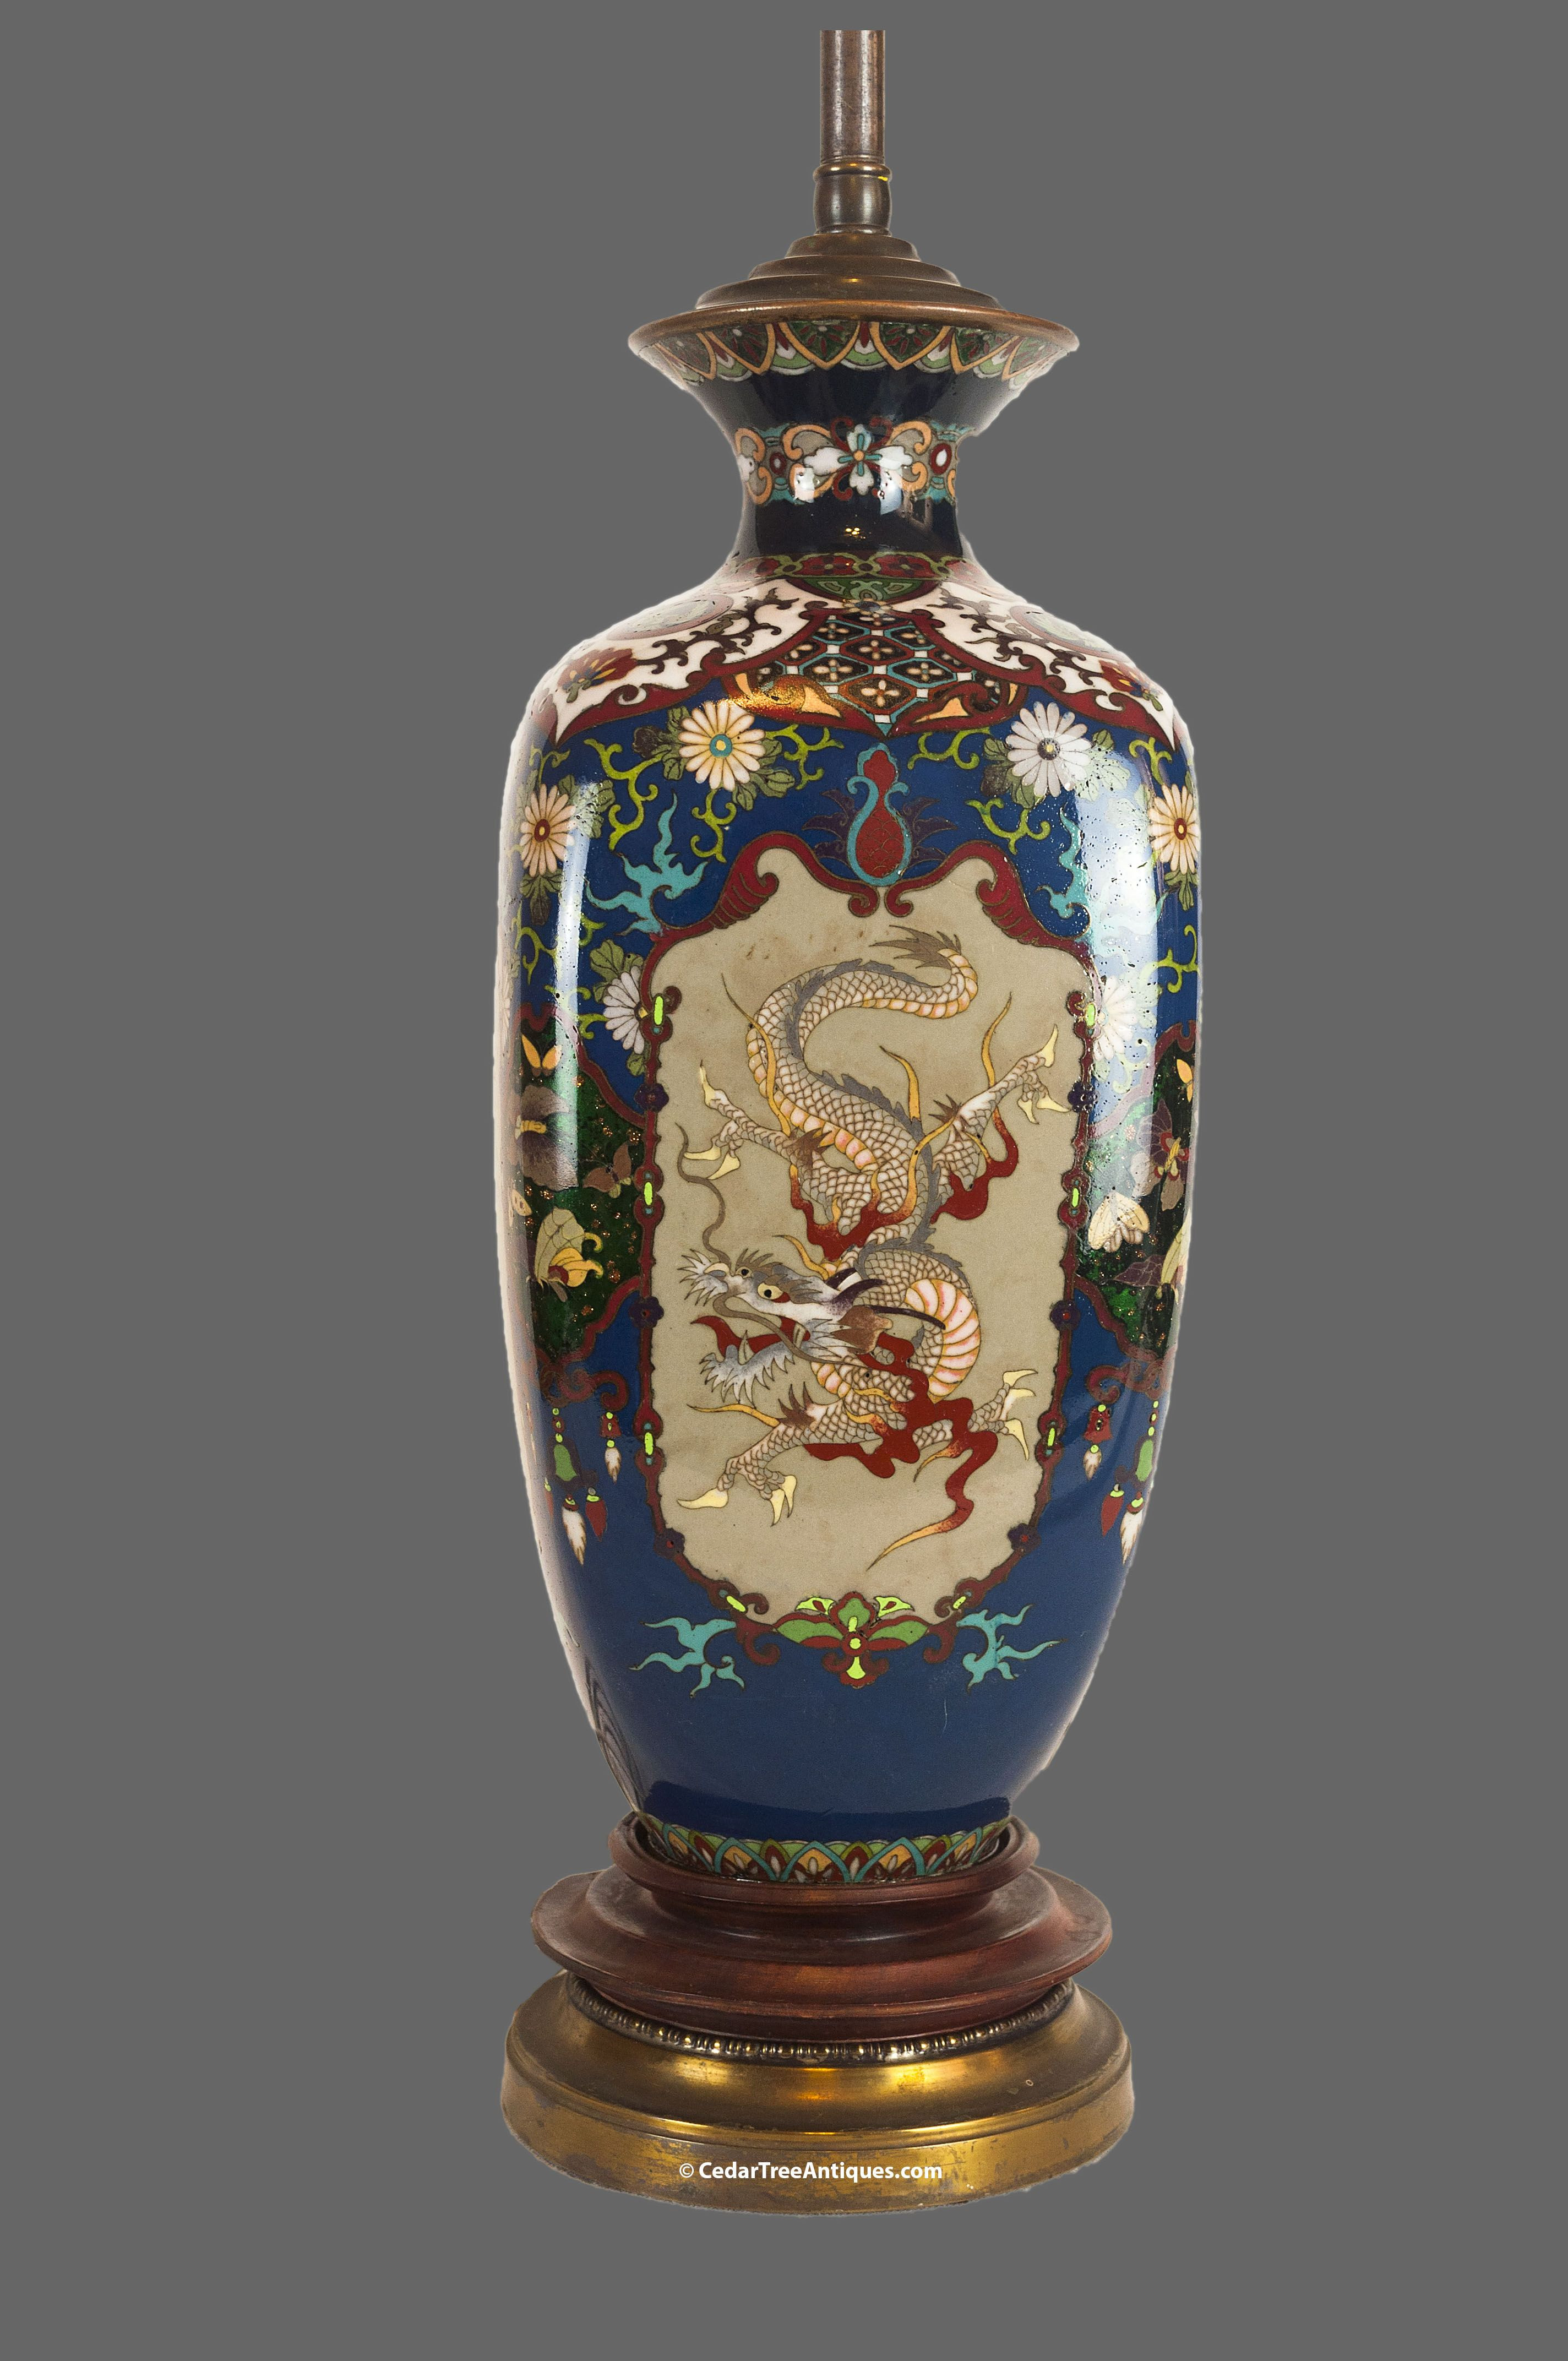 21 Elegant Glass Ginger Vase 2024 free download glass ginger vase of large japanese meiji period cloisonne vase with multi panel multi pertaining to large japanese meiji period cloisonne vase with multi panel multi color dragon and